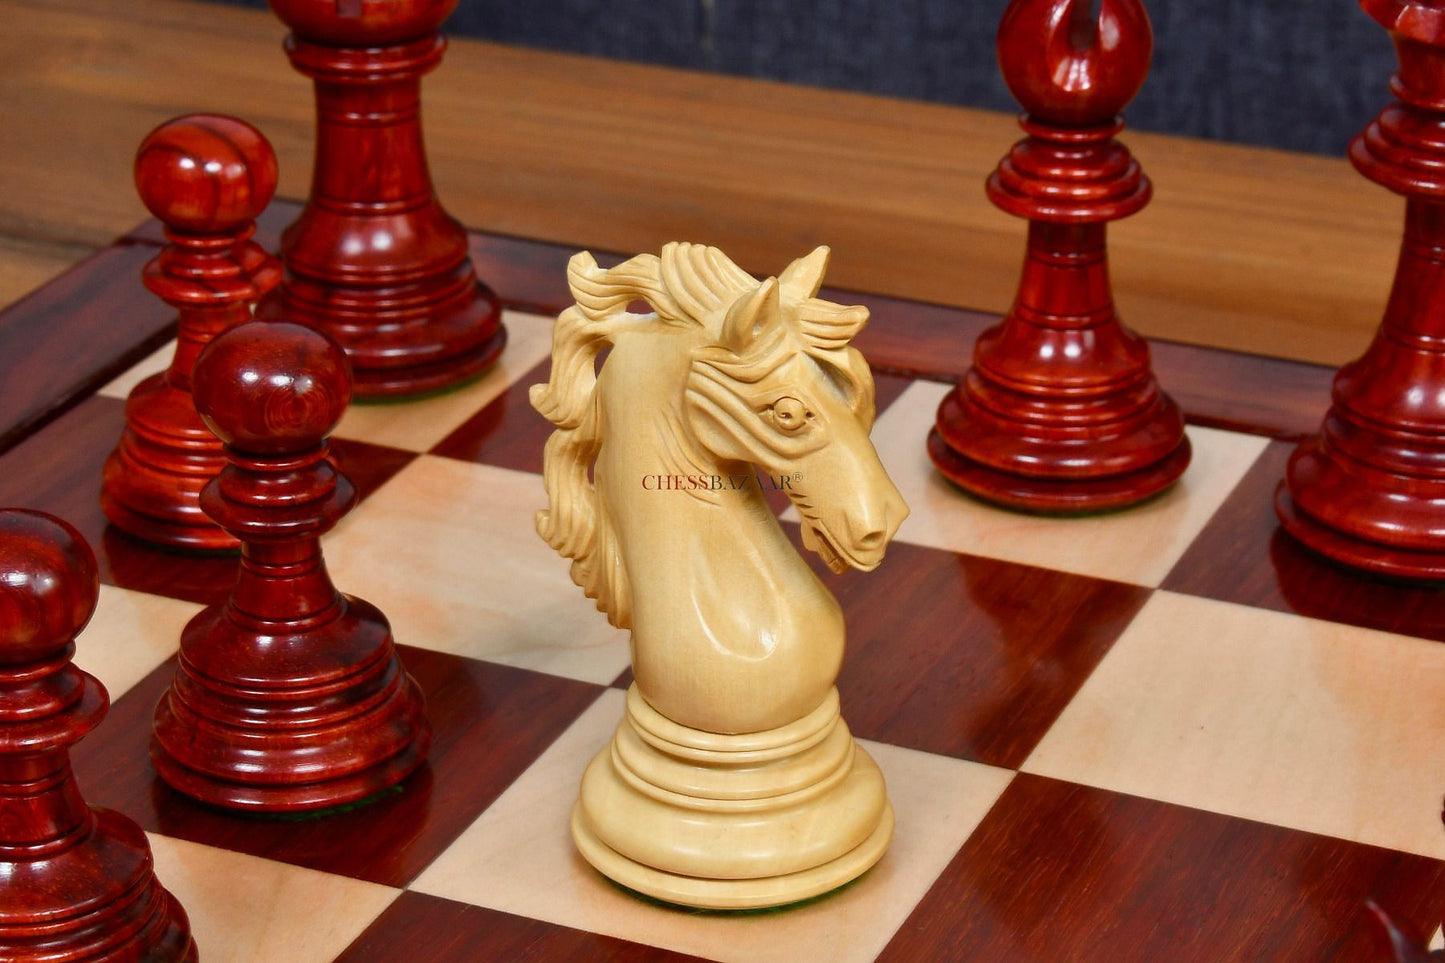 American Adios Series Luxury Chess Pieces in Bud Rose / Box Wood - 4.4" King